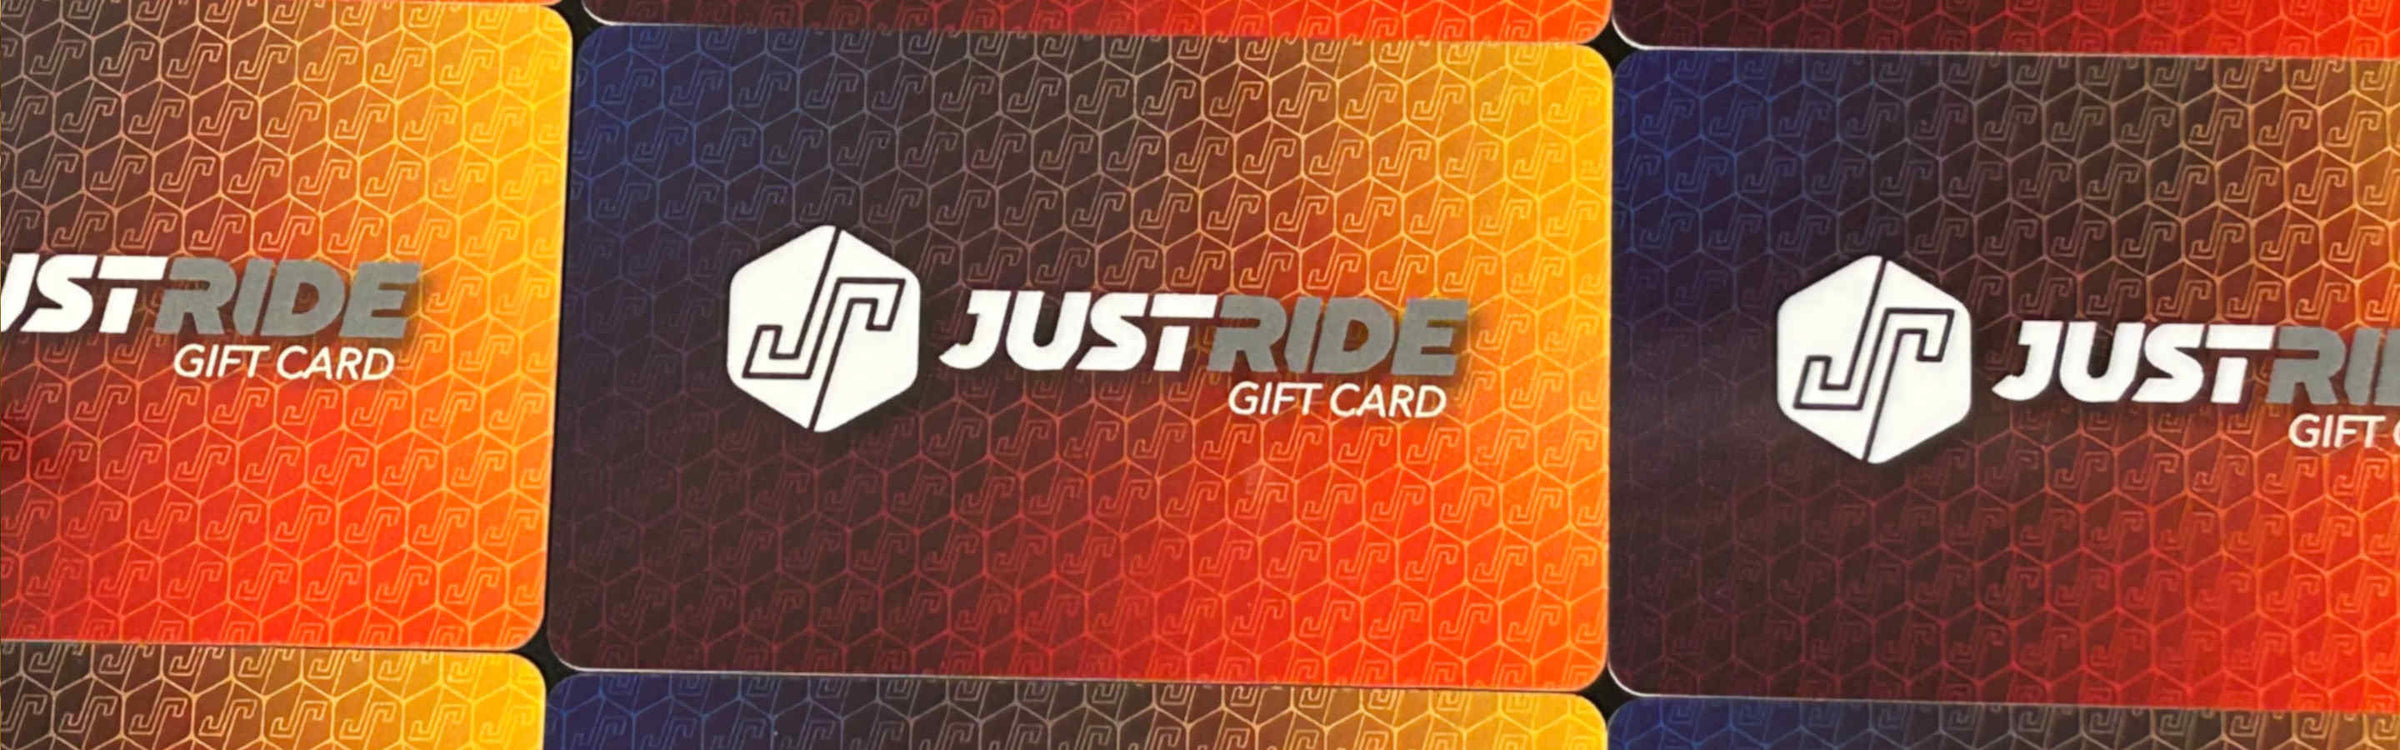 Just Ride Cycling equipment and Bike Gift Cards